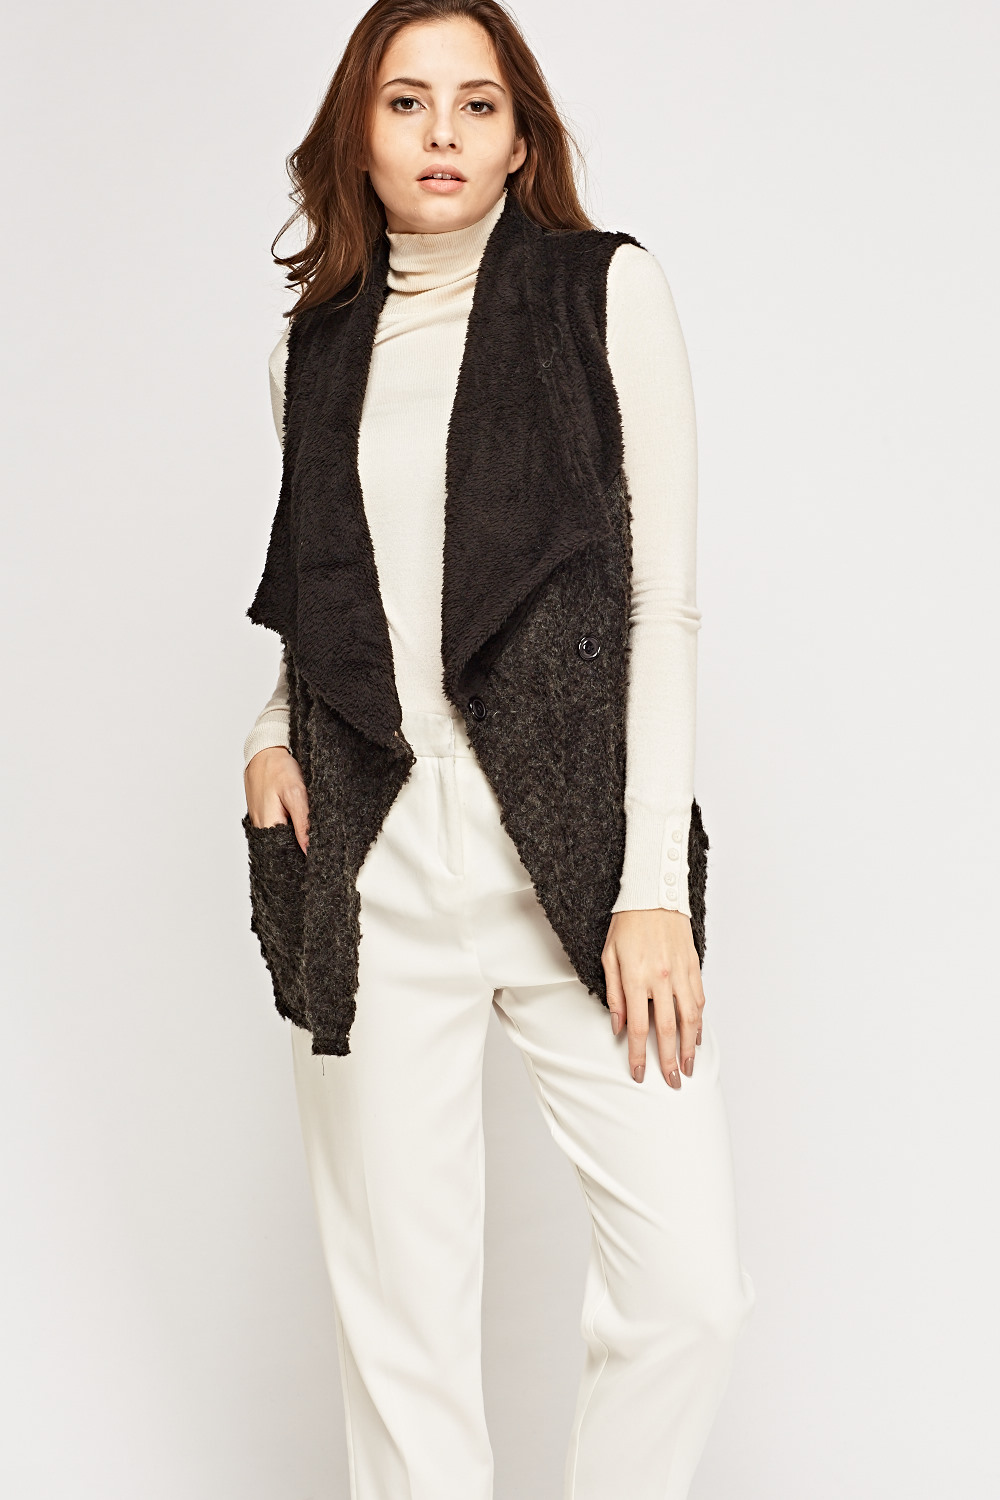 Contrast Knitted Sleeveless Cardigan - Just $7